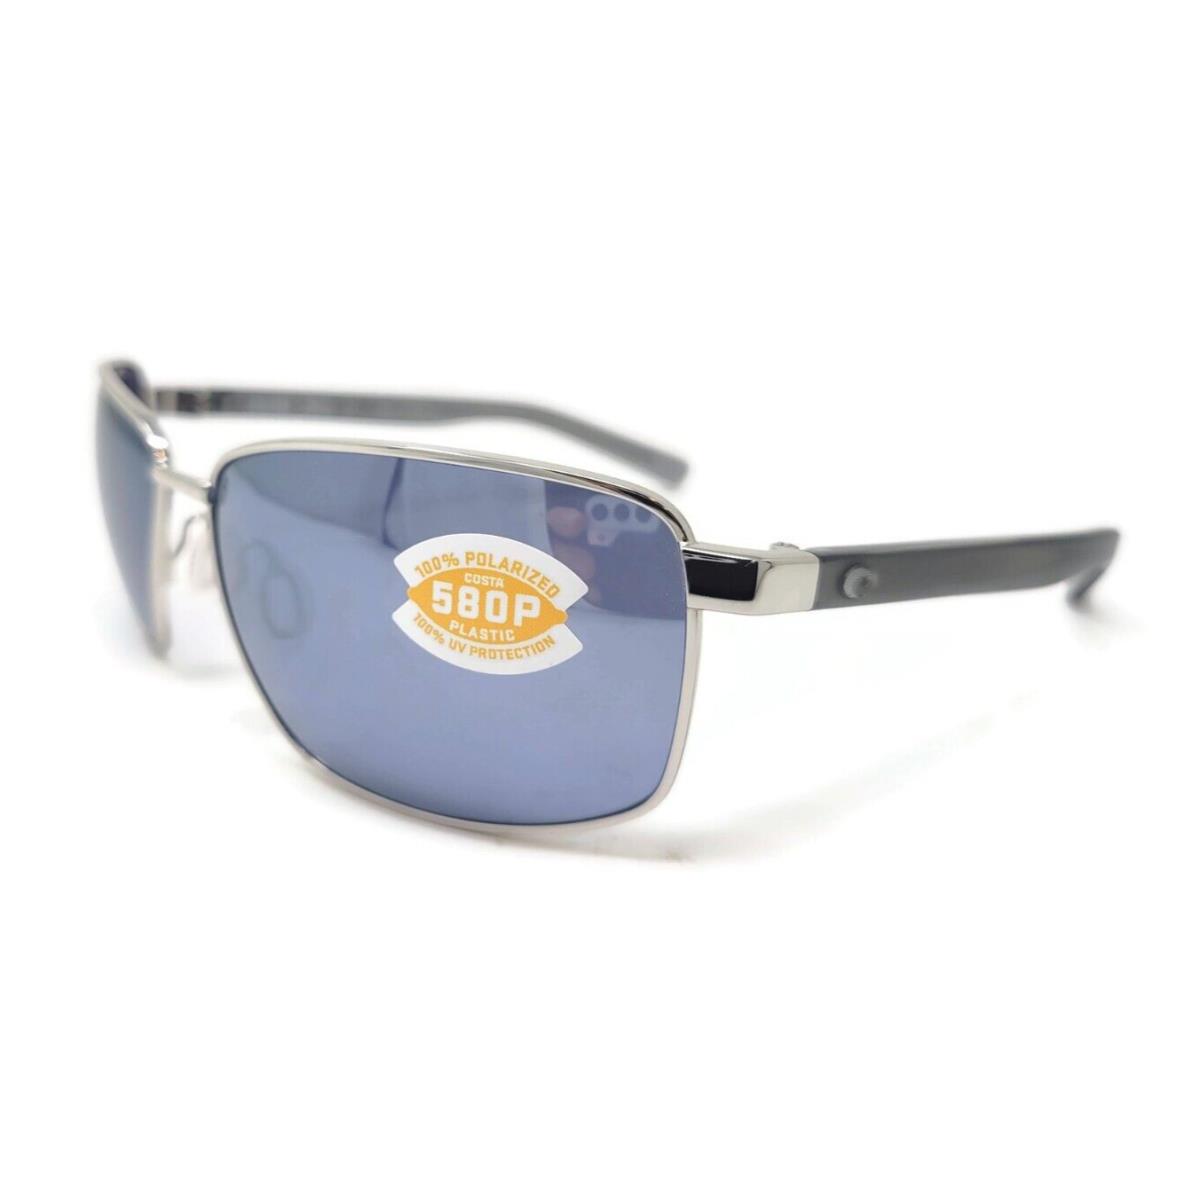 Costa Del Mar Ponce Sunglasses Shiny Silver/gray Silver Mirror 580P Pnc 18 Osgp - Frame: Silver, Lens: Gray